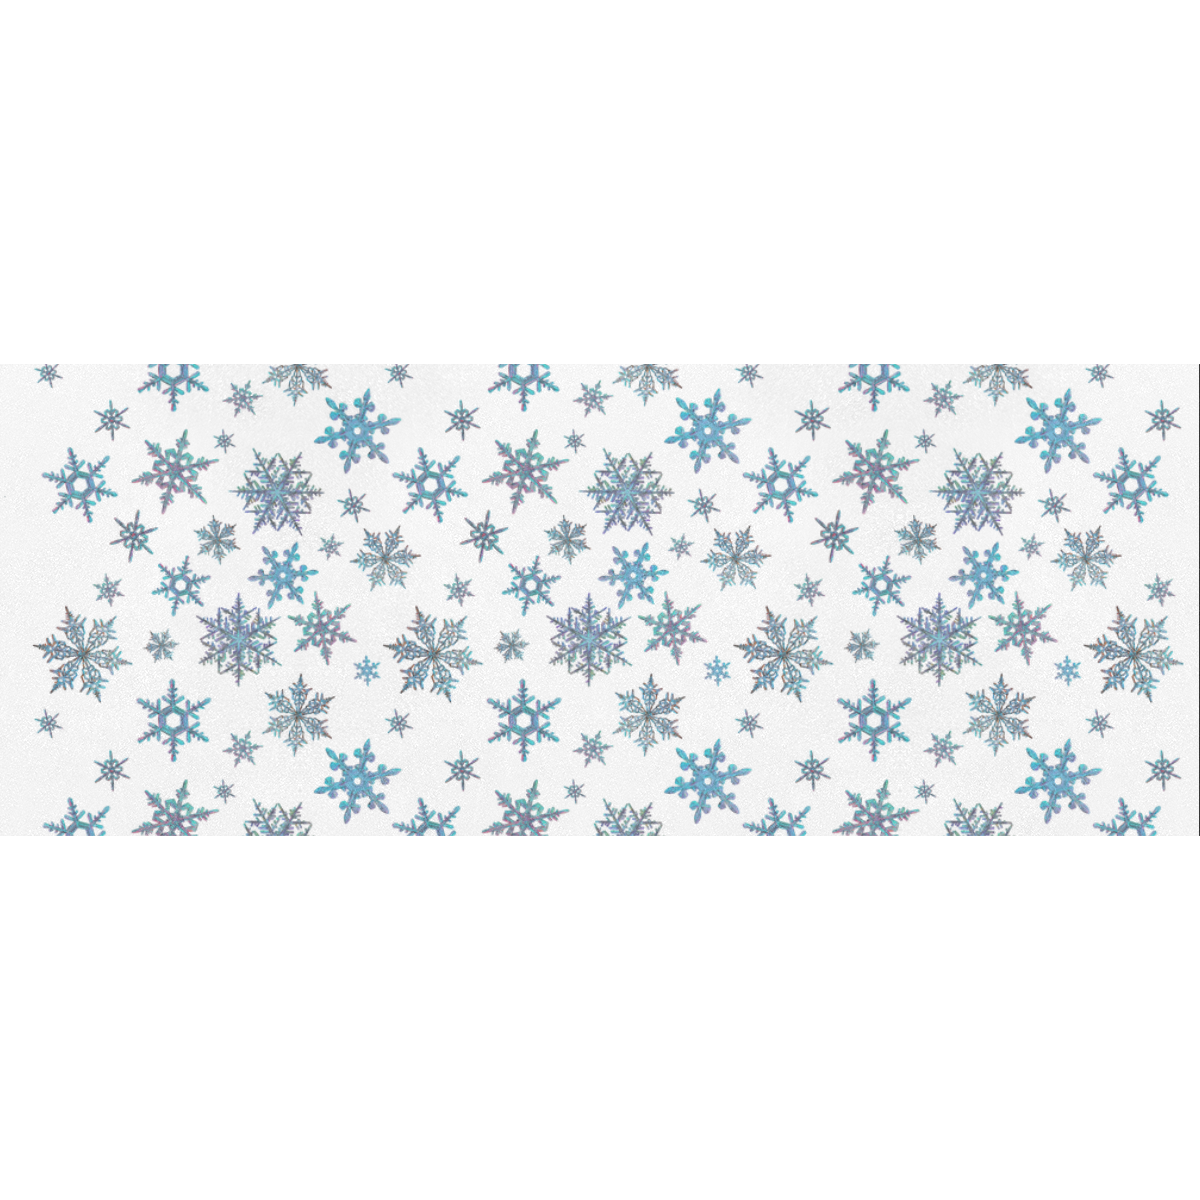 Snowflakes, Blue snow, Christmas Gift Wrapping Paper 58"x 23" (5 Rolls)